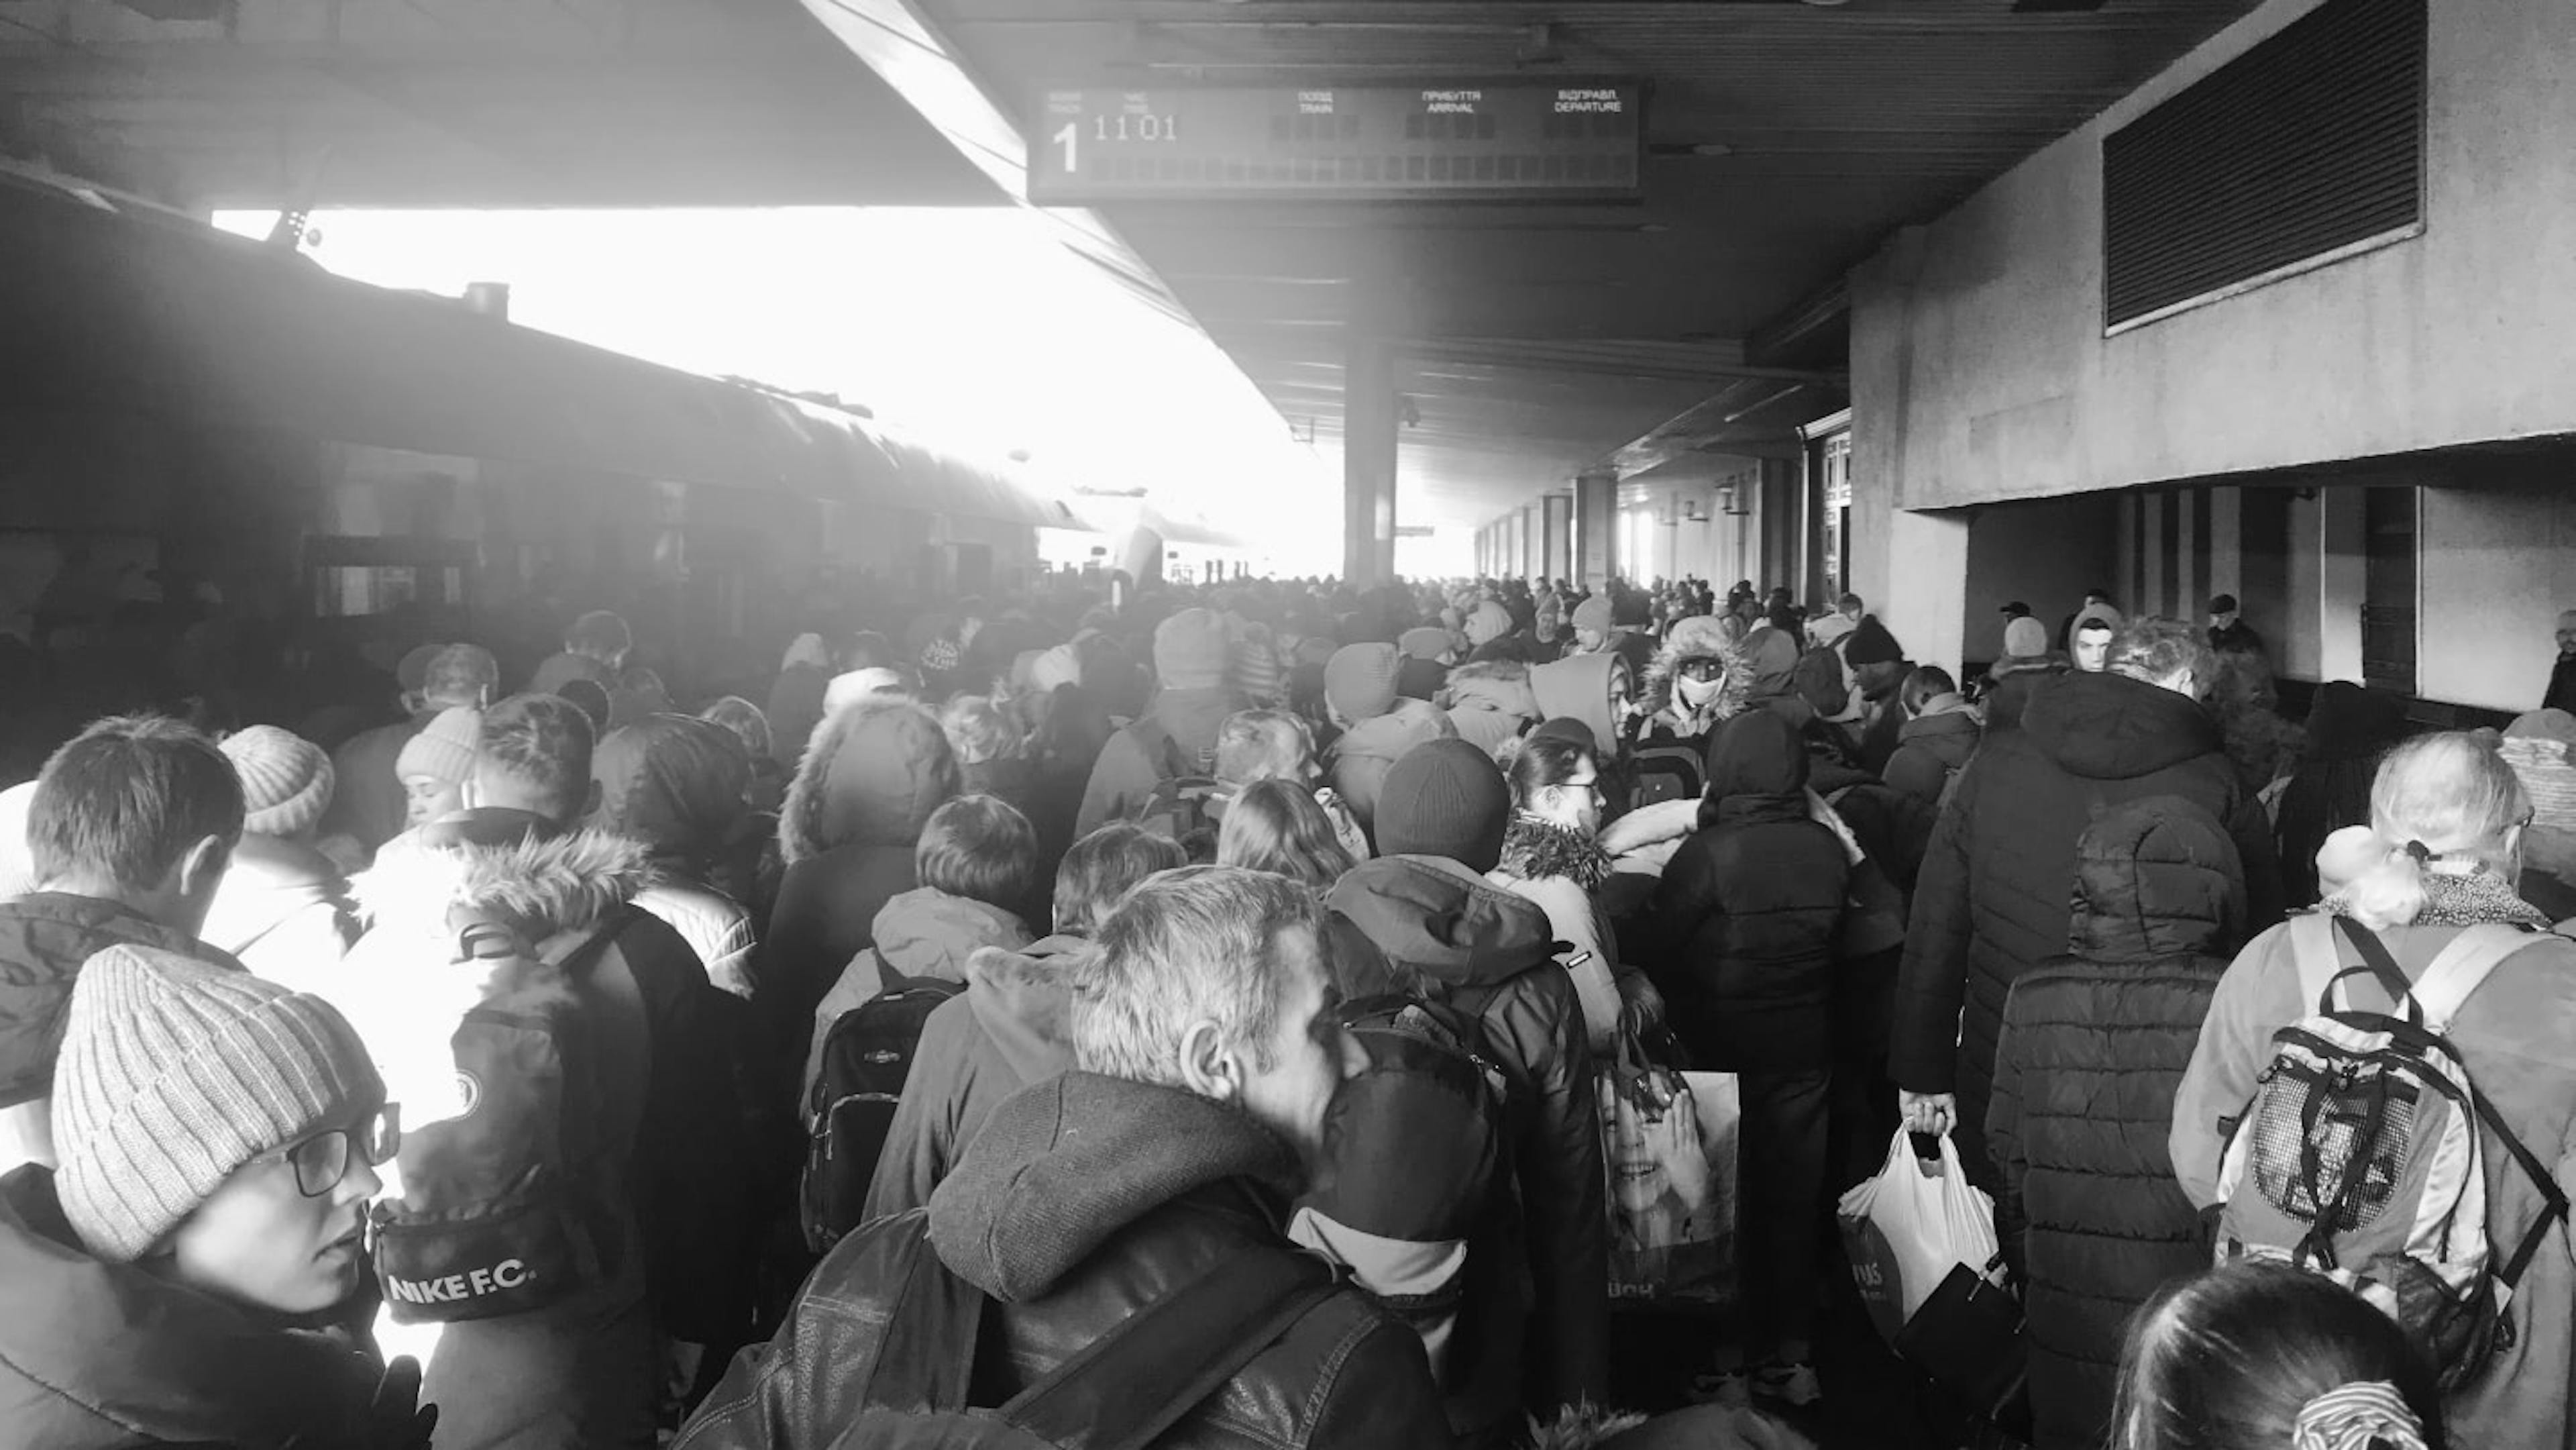 Crowds of people at a Kyiv train station fleeing the city.